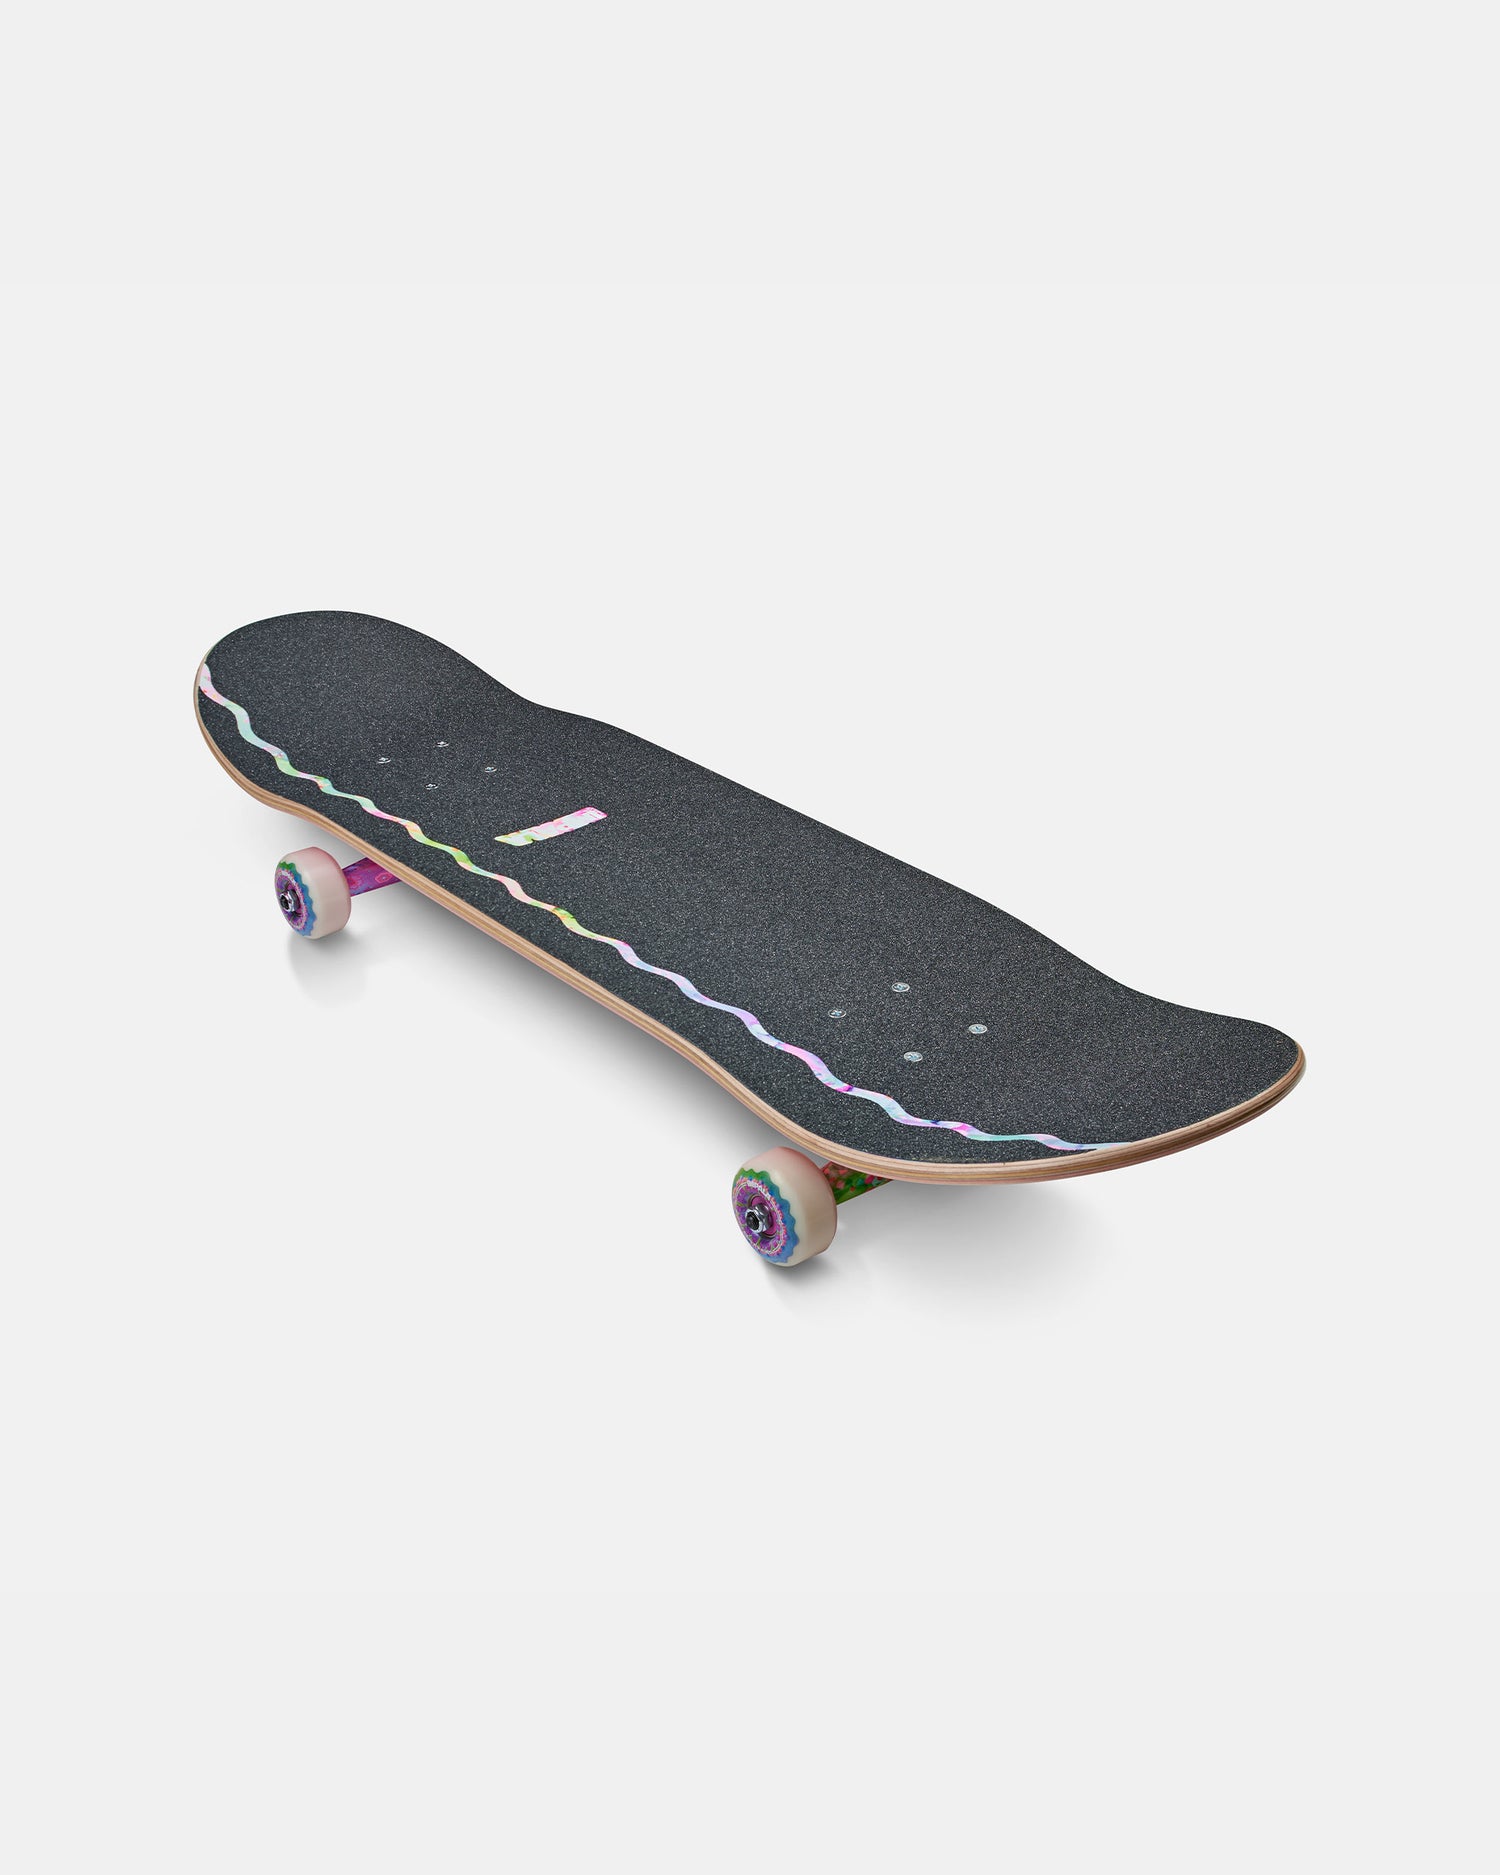 Front angled of Pip and Pop Skateboard - Candy Mountain